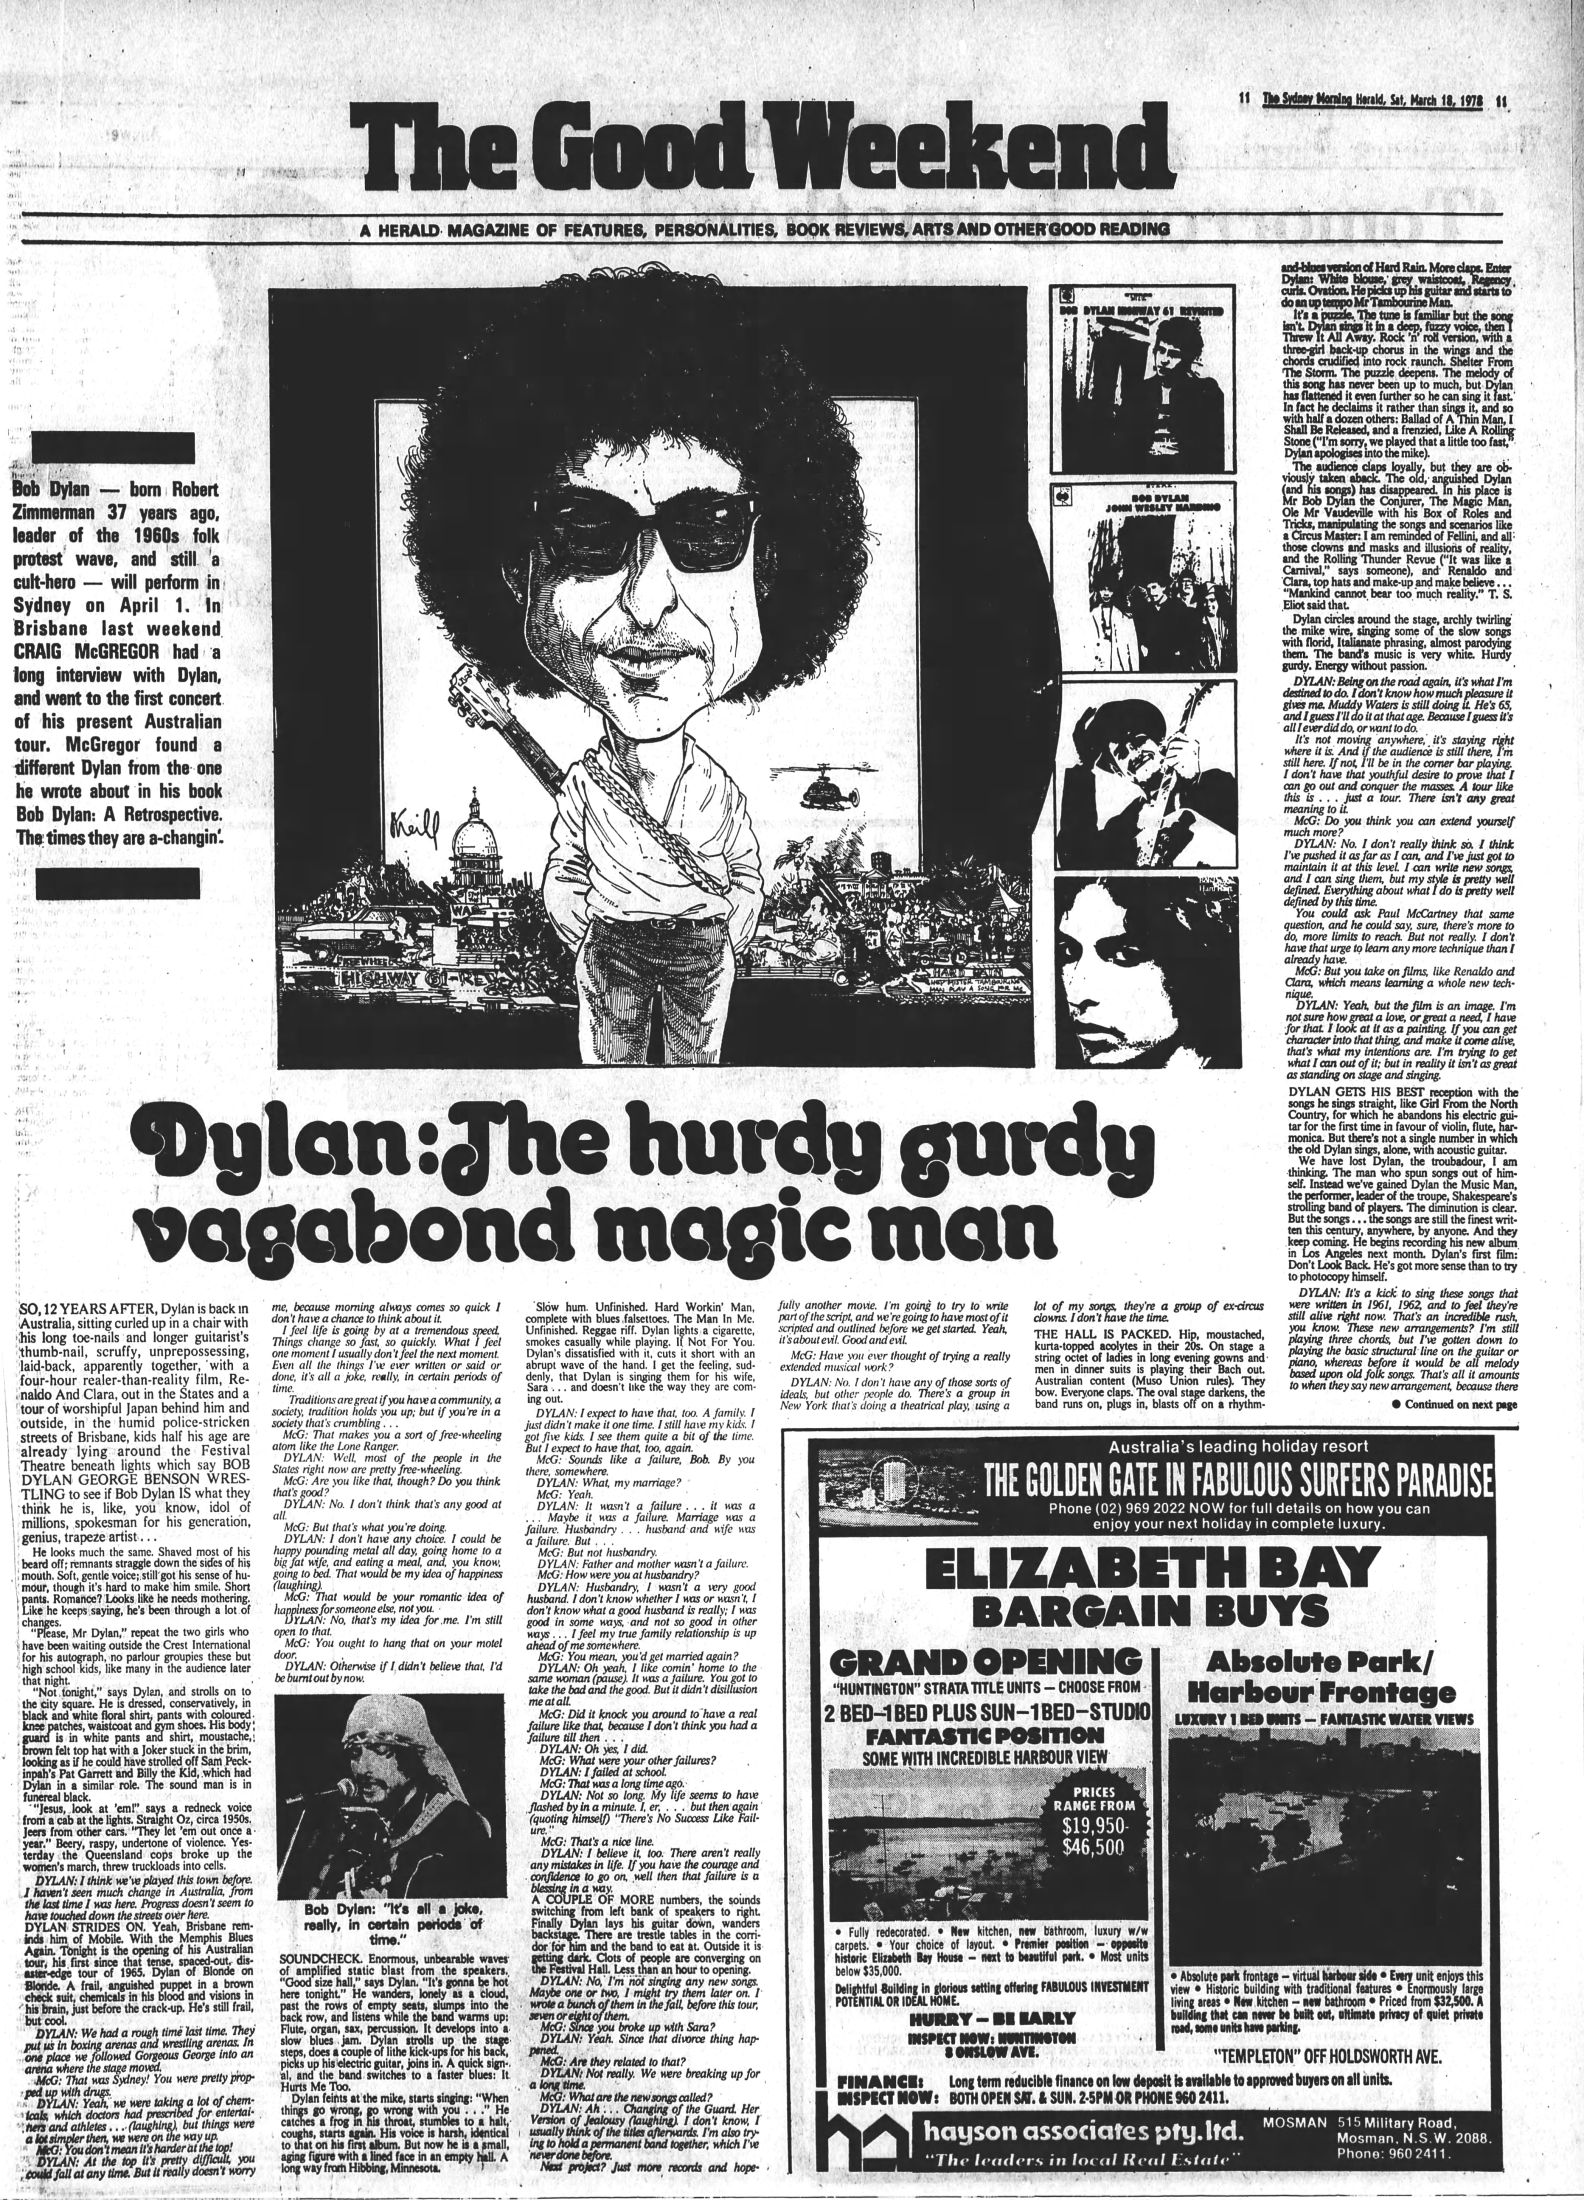 the sydney morning herald March 1978 Bob Dylan front cover